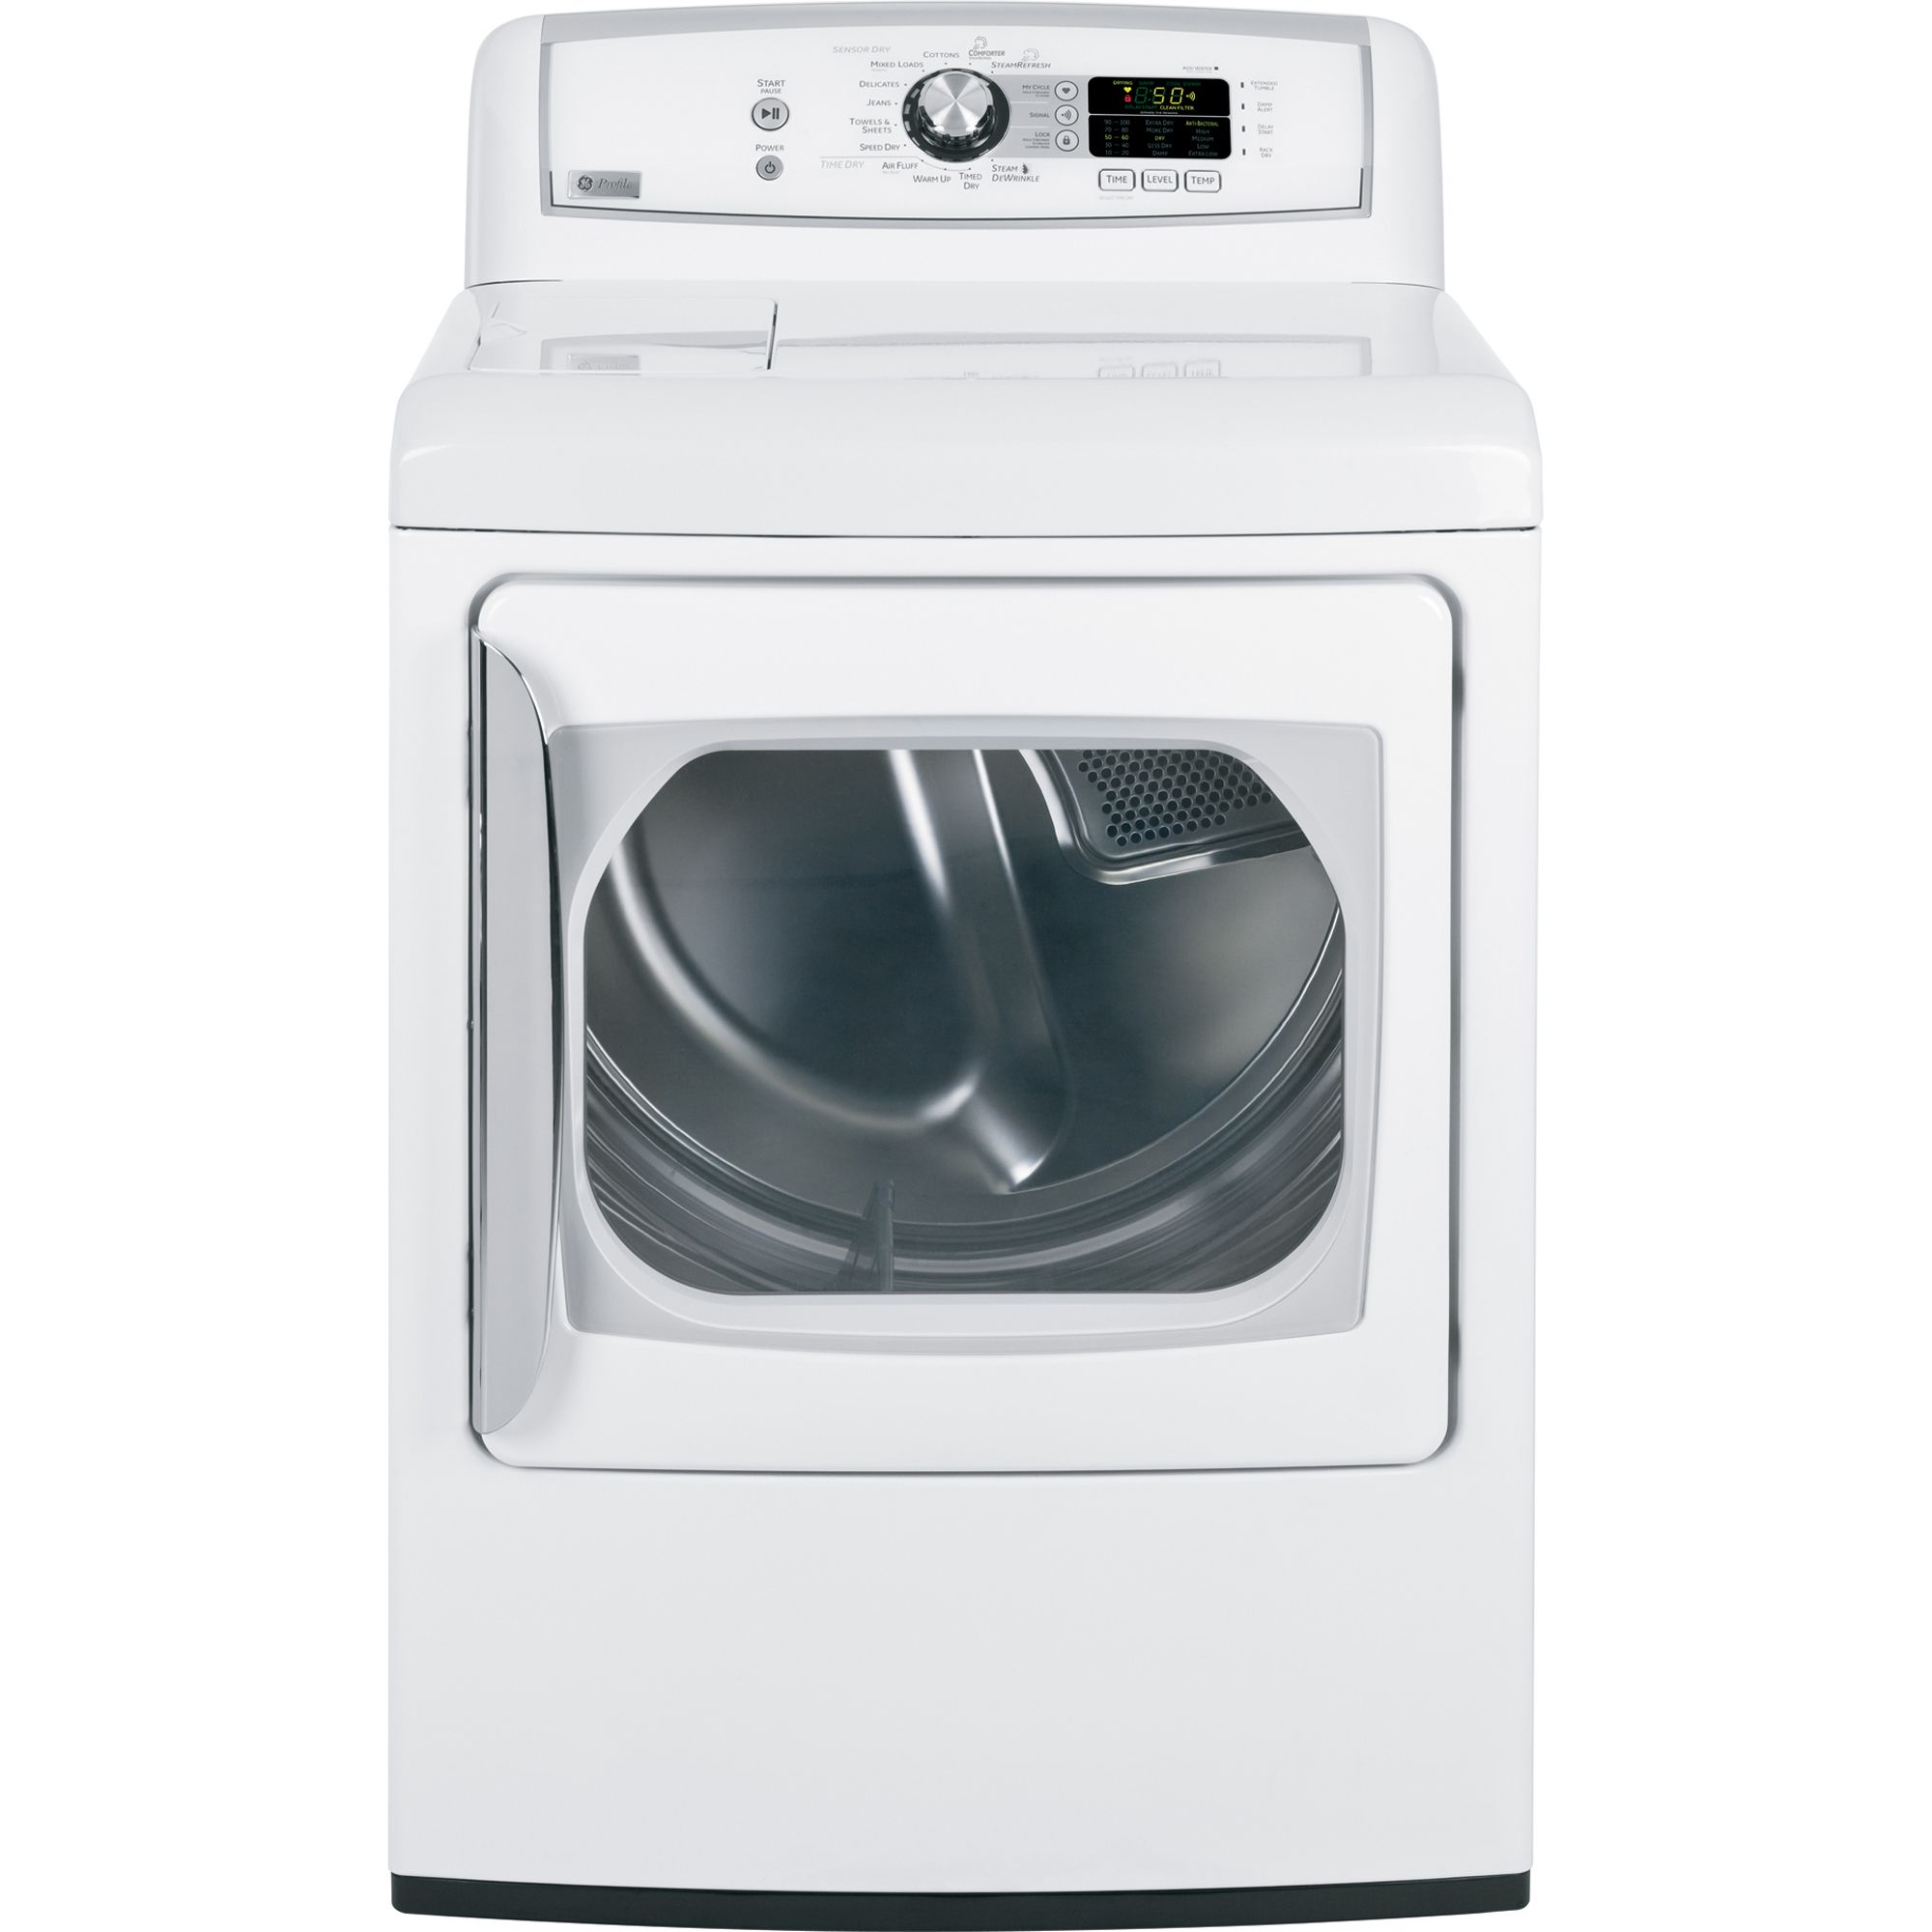 GE Profile Series 7.3 cu. ft. Harmony Electric Dryer White 7.0 cu. ft. and greater